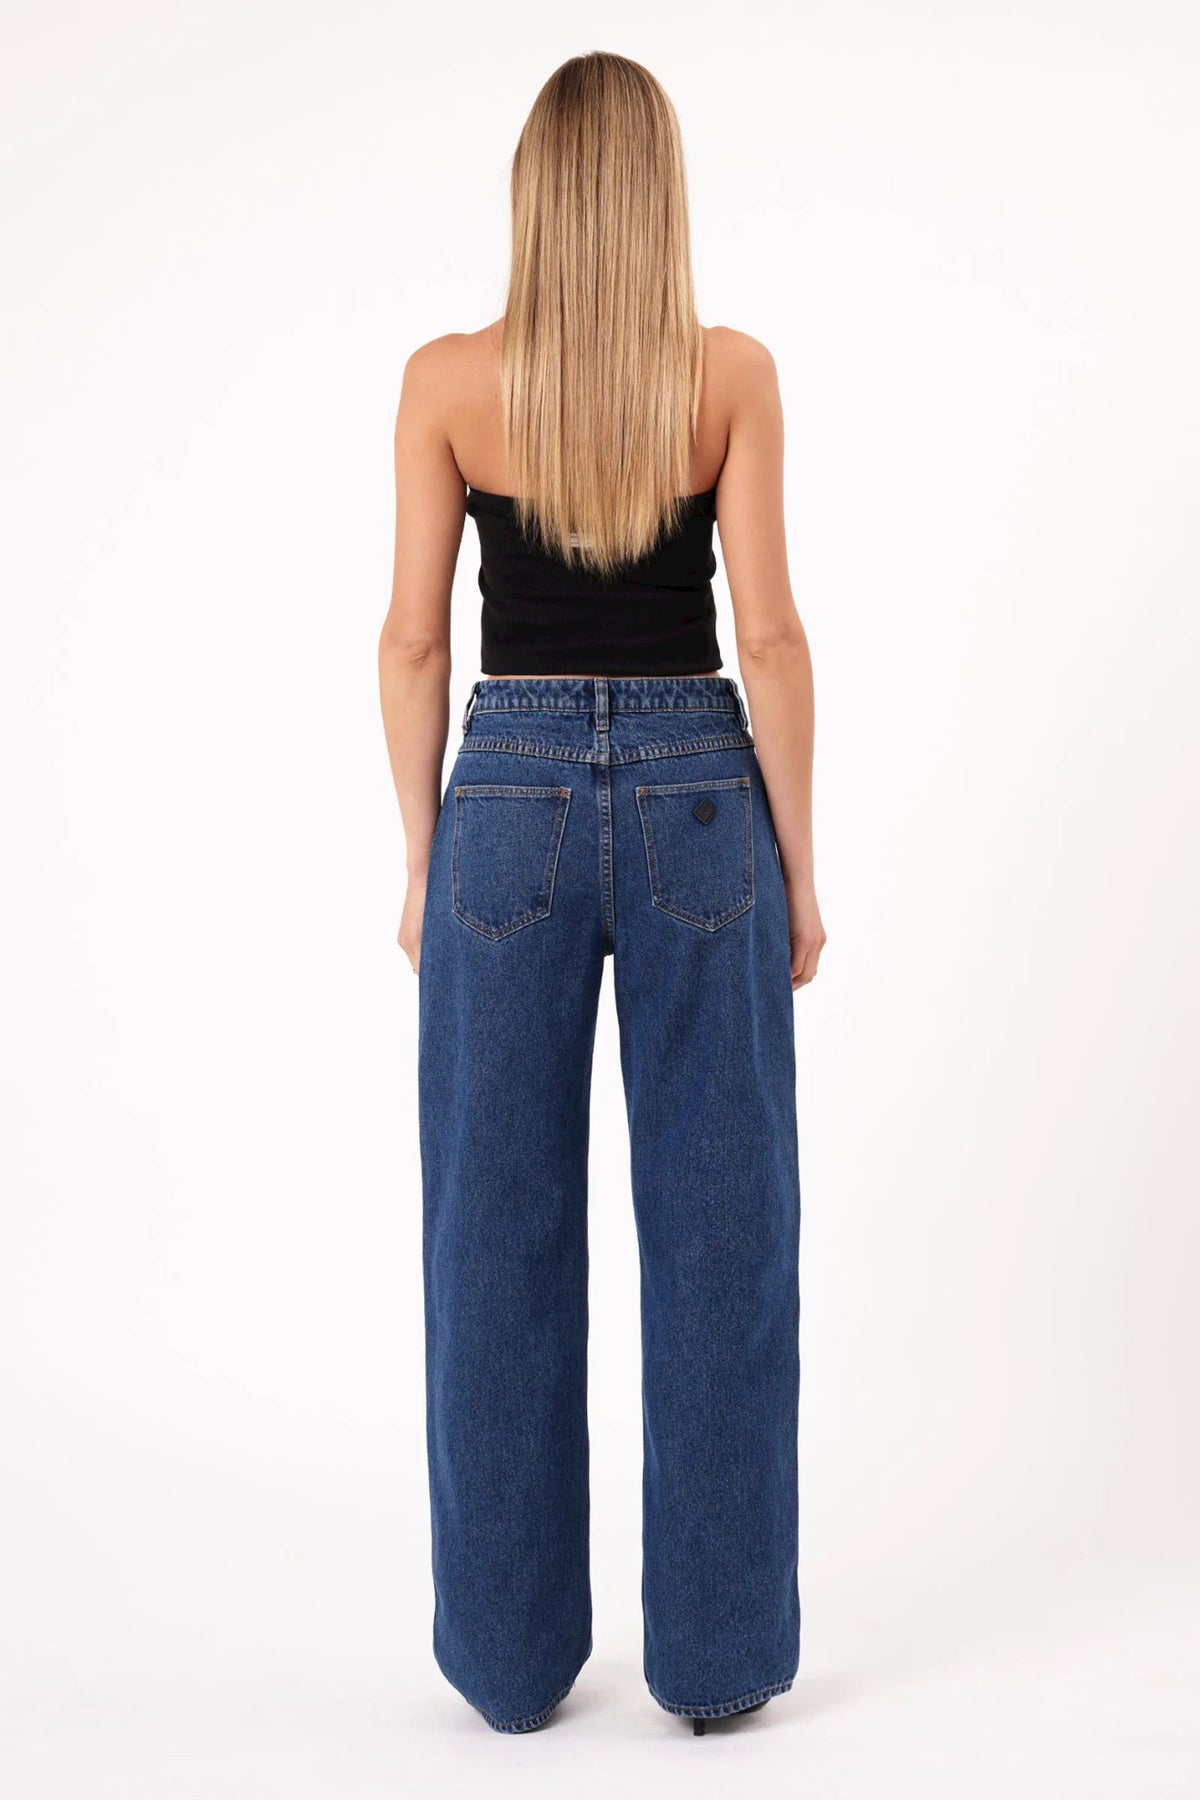 95 Mid Baggy Bella - Sare StoreAbrand JeansJeans